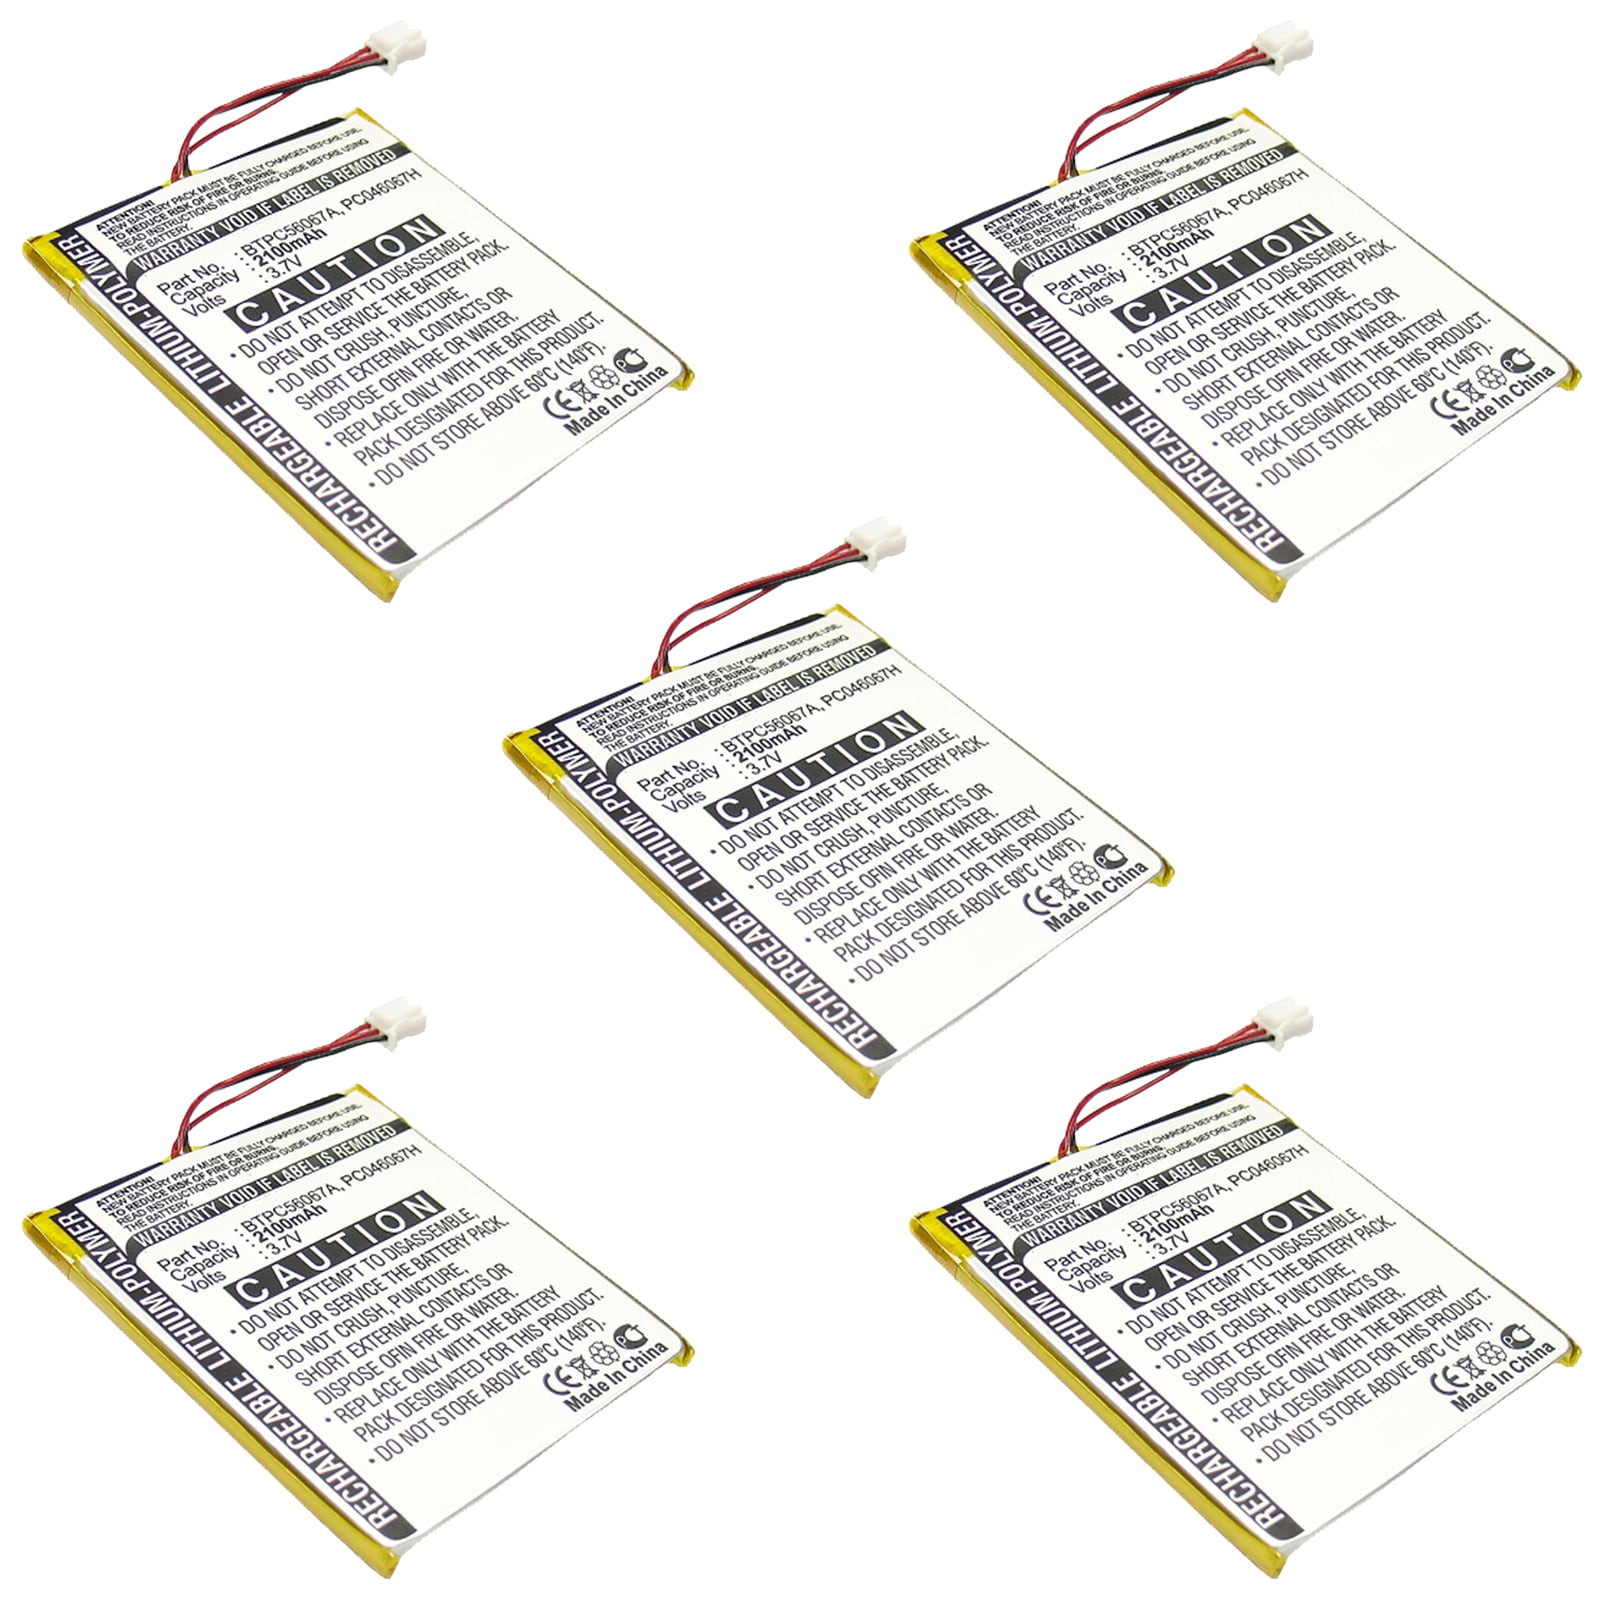 Remote contol replacement battery for BTPC56067A MX-3000 MX3000i PC046067H 2100mAh 3.7V